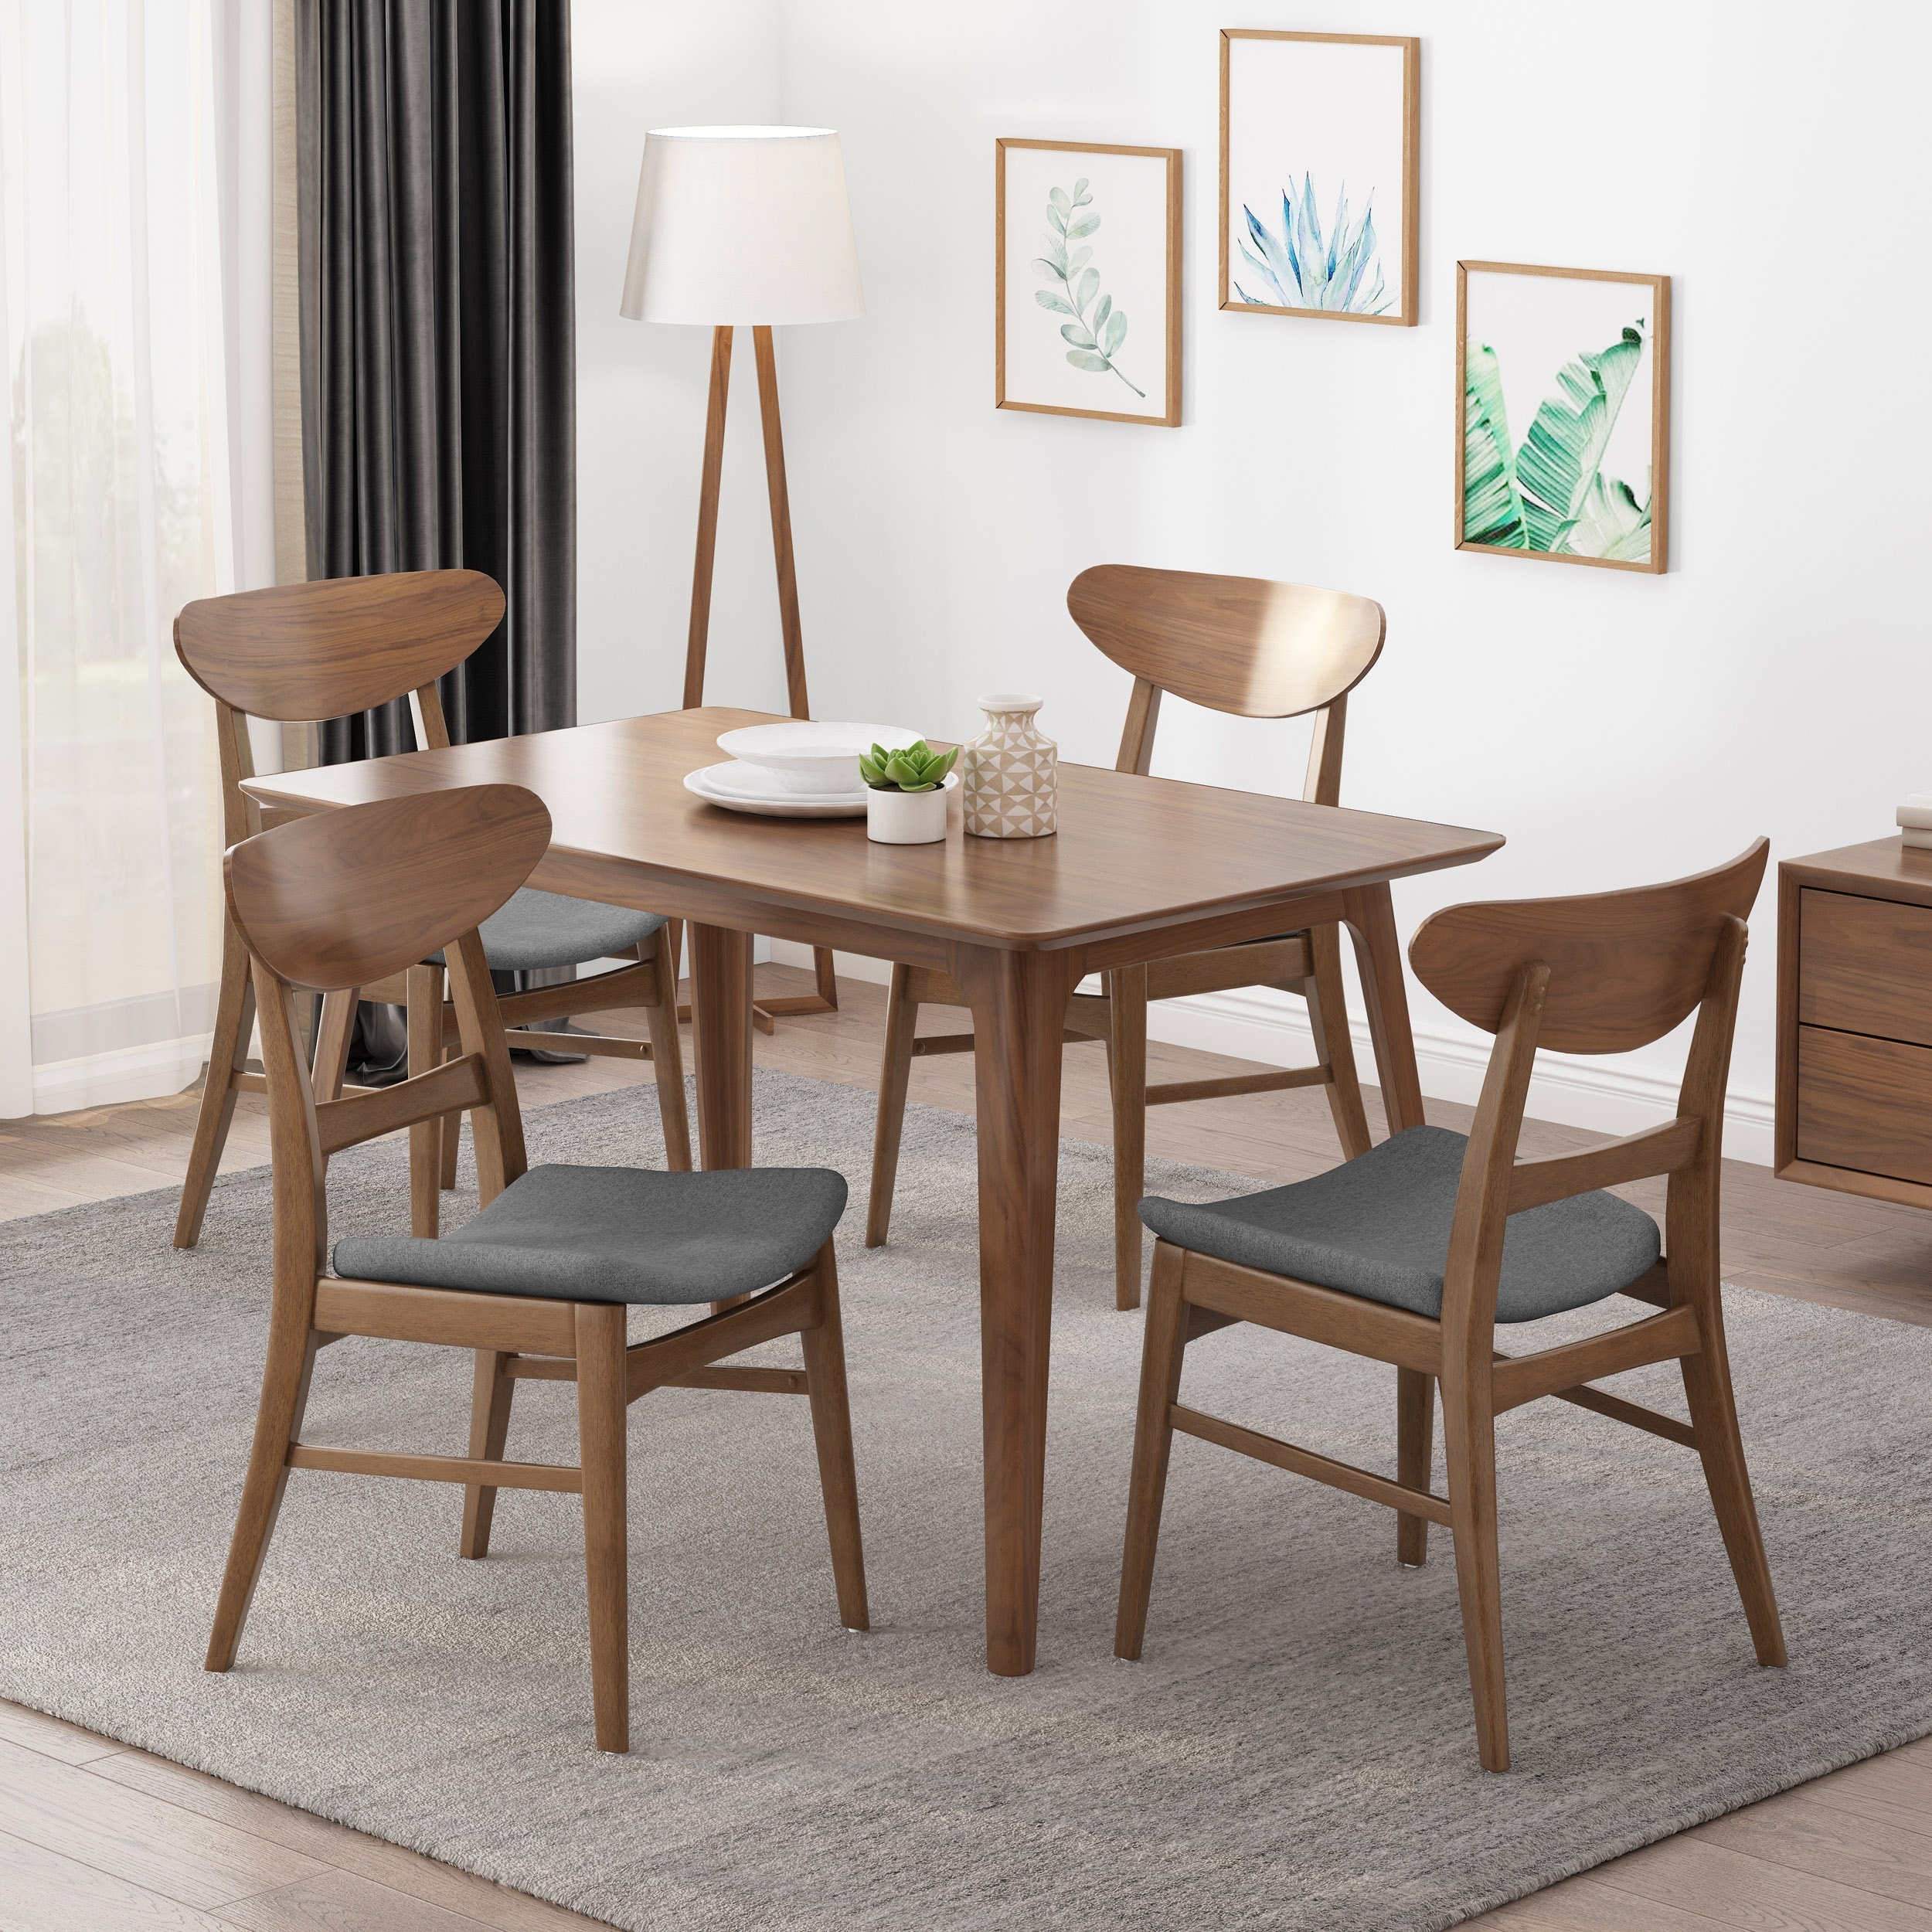 https://ak1.ostkcdn.com/images/products/is/images/direct/2aeececb9ed412d7cf3300a742df79d5601fddca/Idalia-Mid-Century-Modern-Dining-Chairs-%28Set-of-4%29-by-Christopher-Knight-Home.jpg